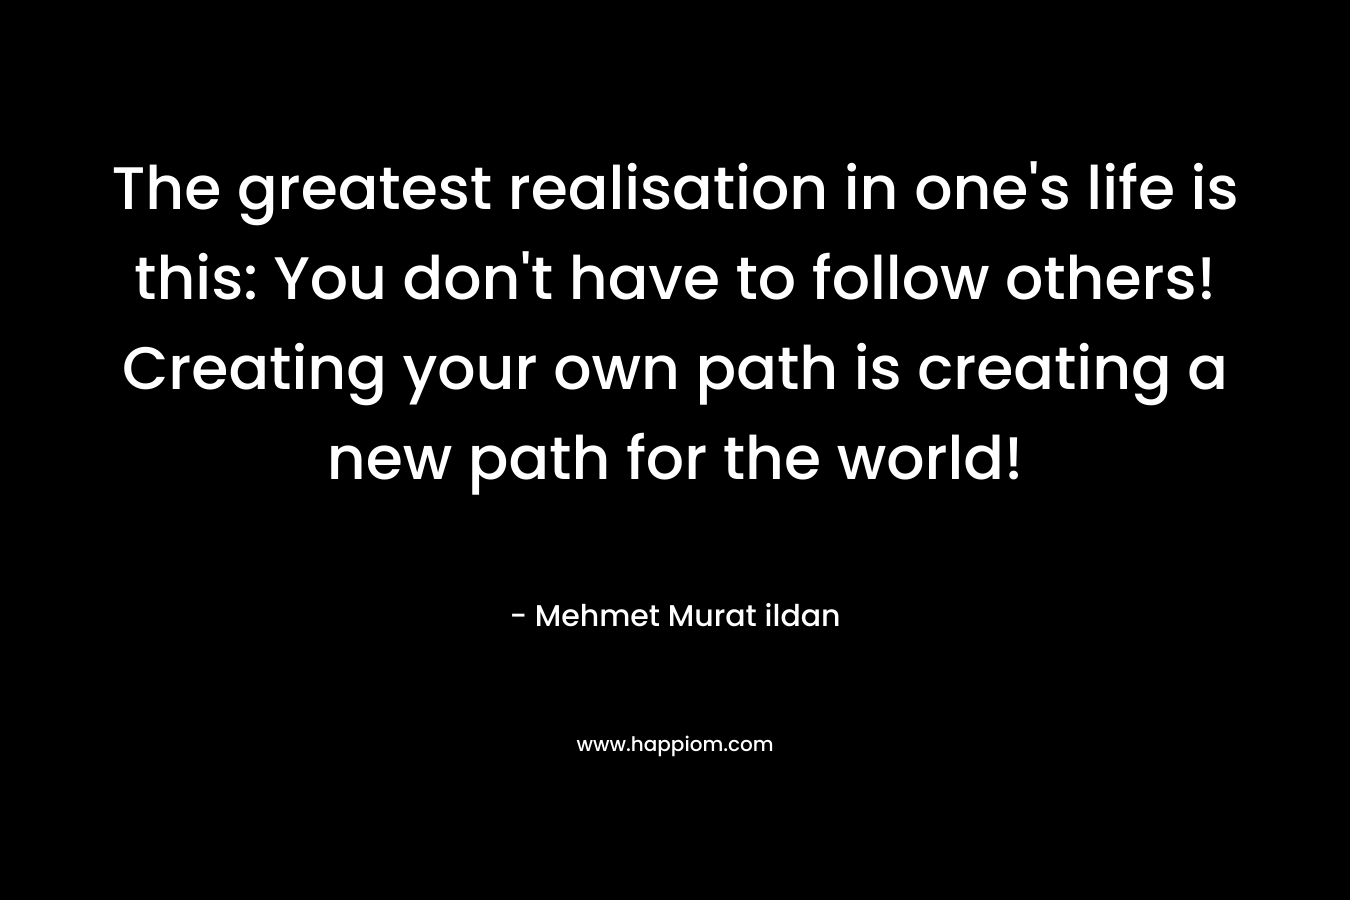 The greatest realisation in one's life is this: You don't have to follow others! Creating your own path is creating a new path for the world!